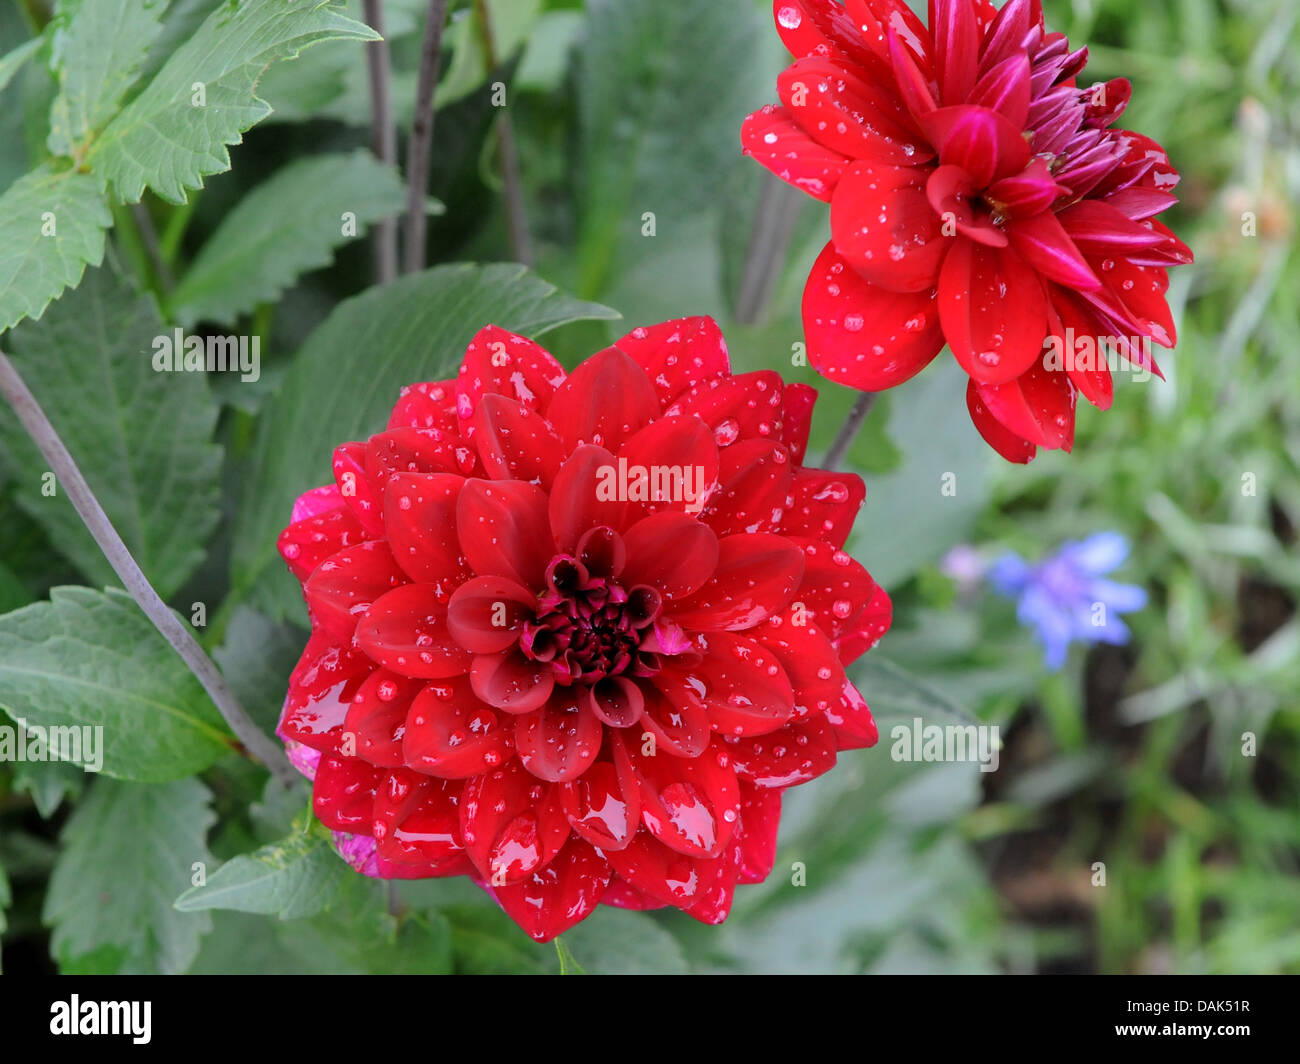 Bright red dahlia flowers that have been watered. Stock Photo